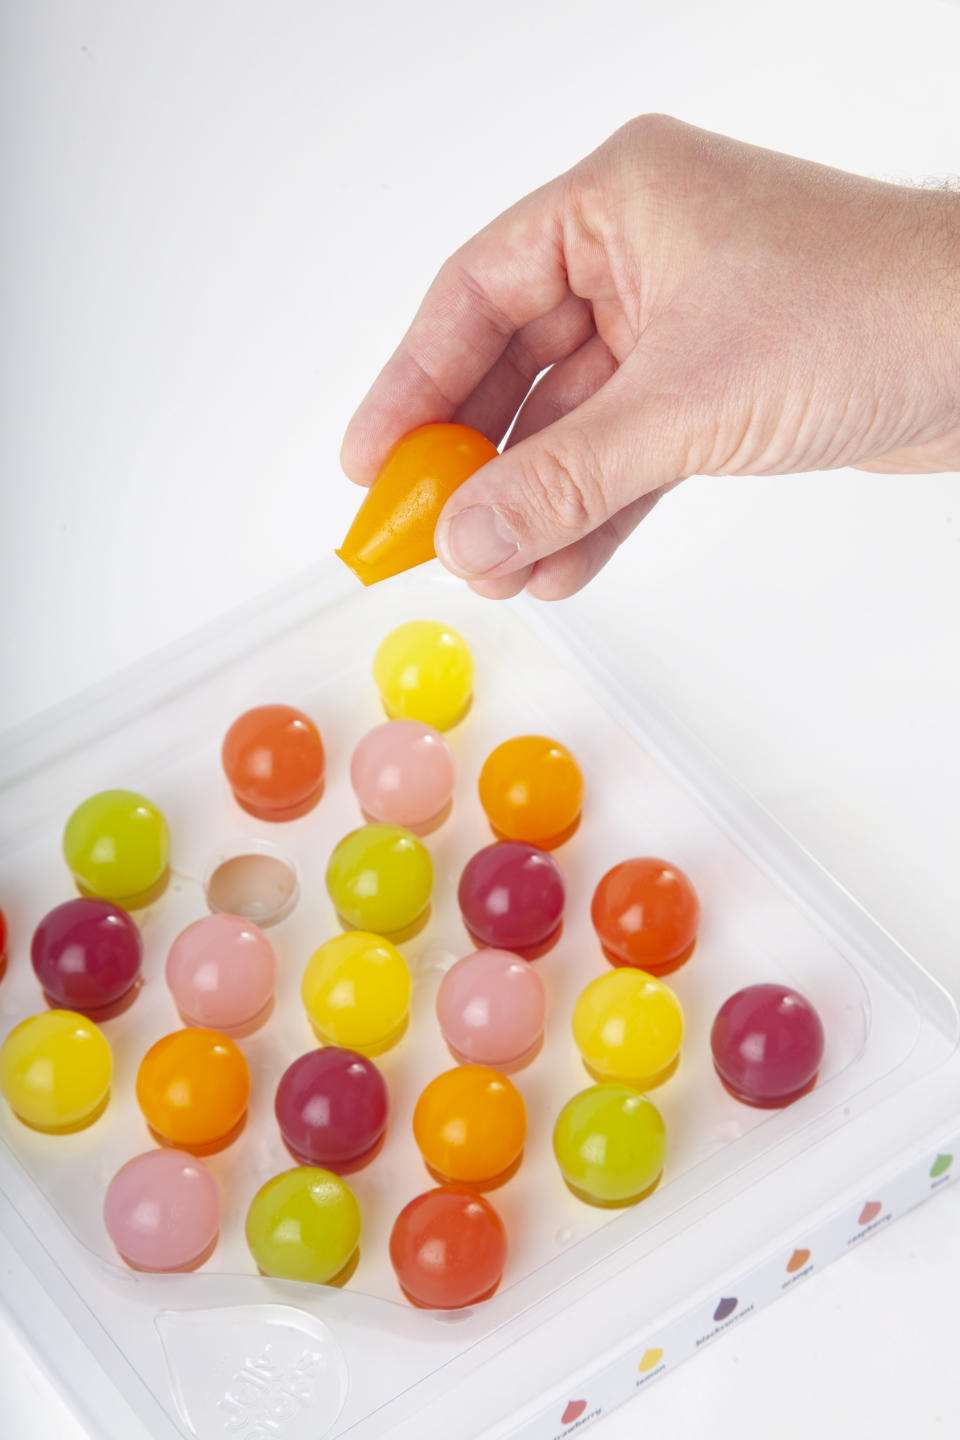 Lewis Hornby developed Jelly Drops in response to his Grandma Pat's struggle with dehydration due to dementia. (SWNS)